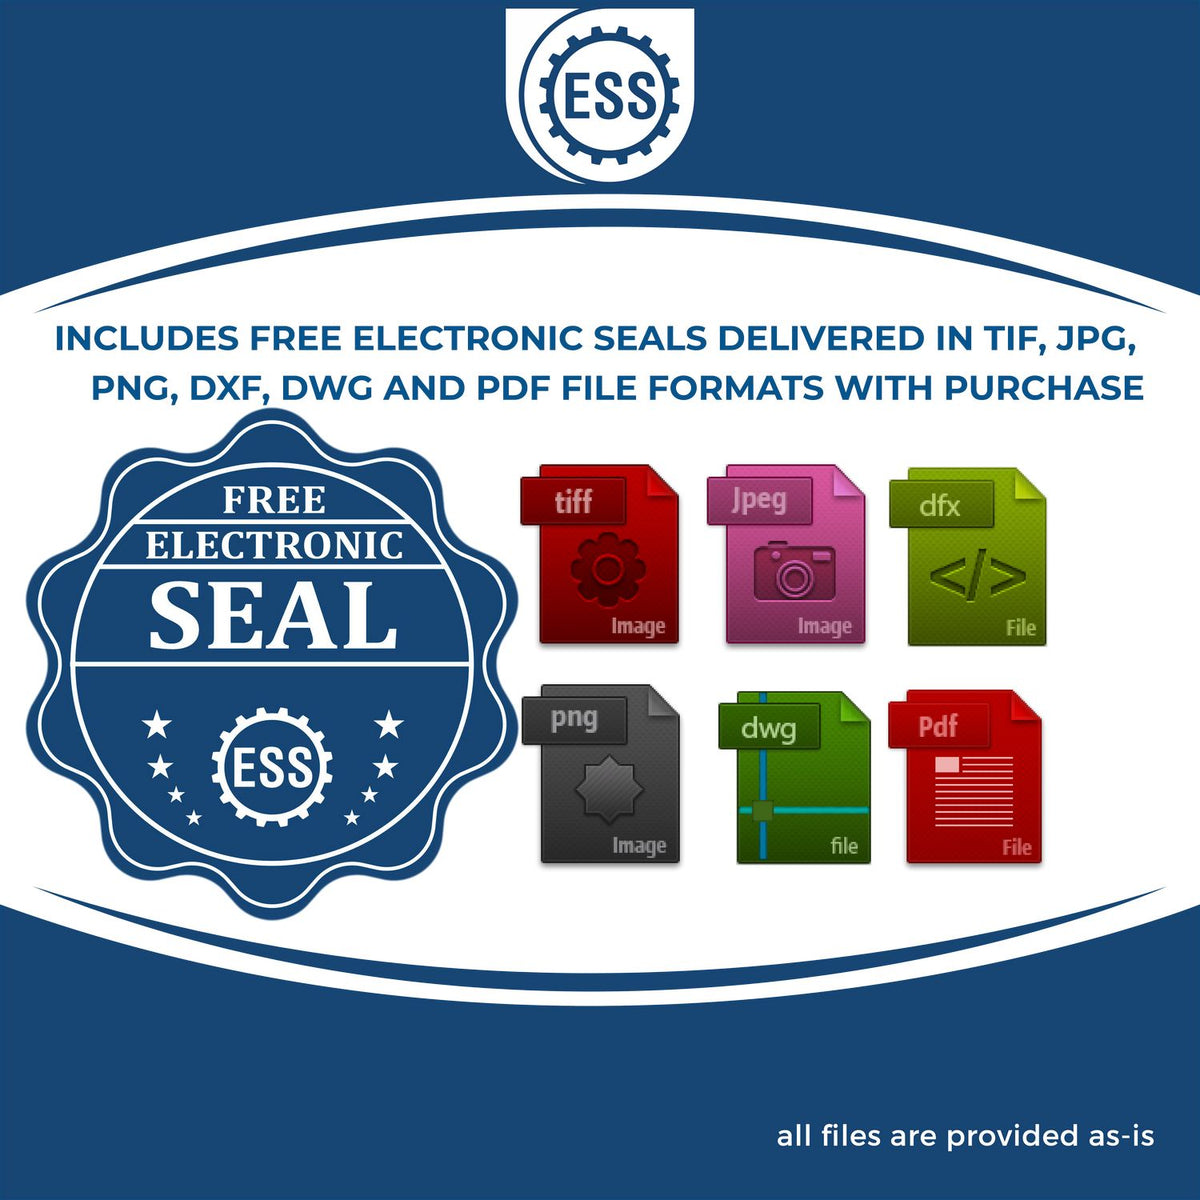 An infographic for the free electronic seal for the Soft Pennsylvania Professional Geologist Seal illustrating the different file type icons such as DXF, DWG, TIF, JPG and PNG.